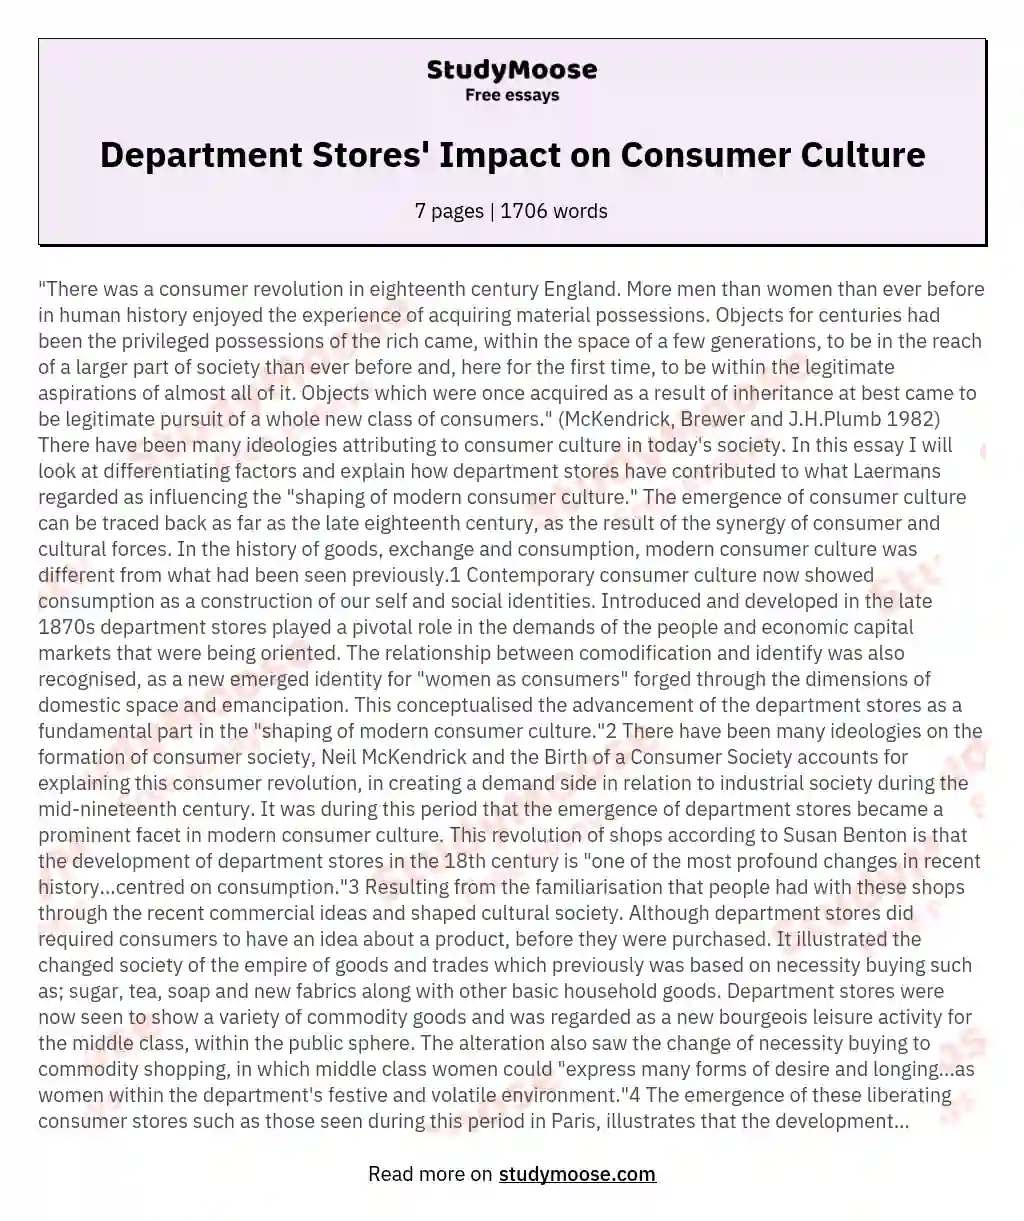 Identify and explain how department stores contributed to the "shaping on modern culture consumer culture